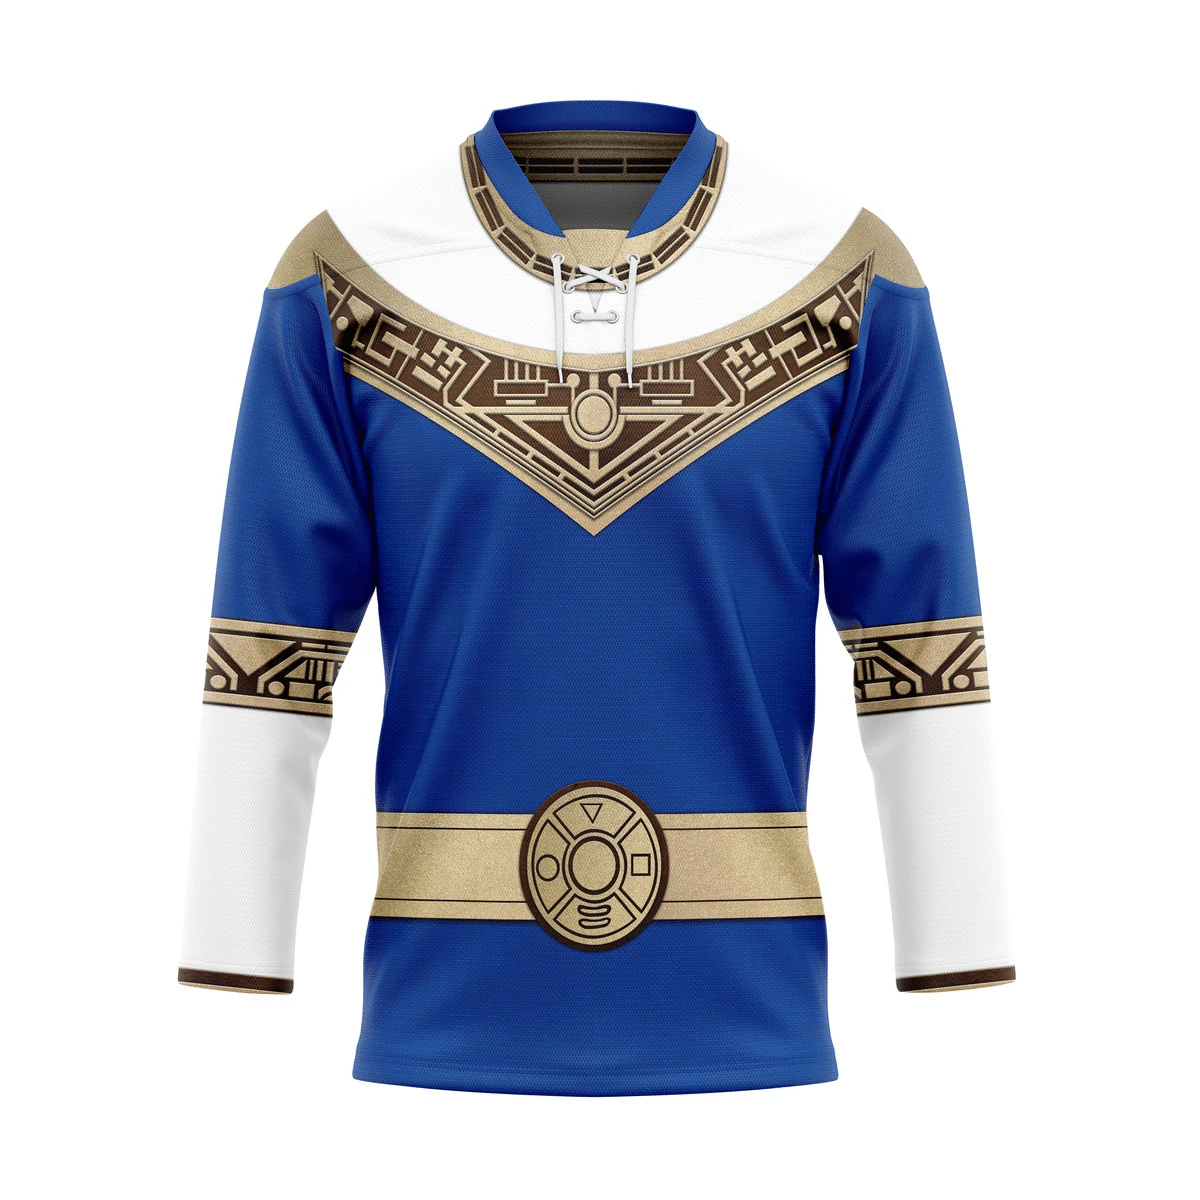 Top cool Hockey jersey for fan You can buy online. 55